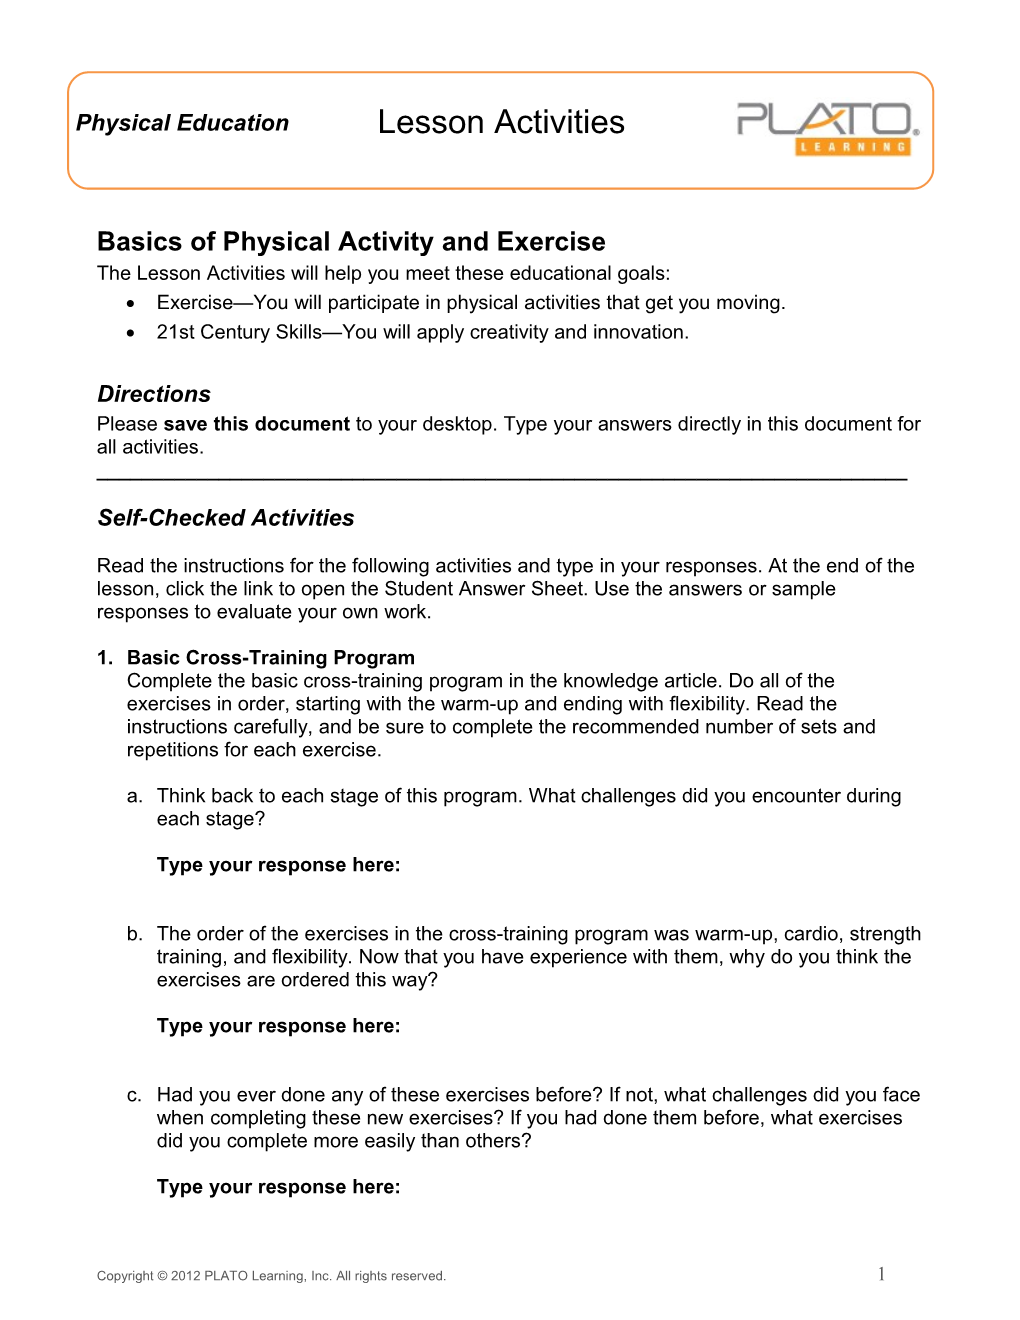 Basics of Physical Activity and Exercise